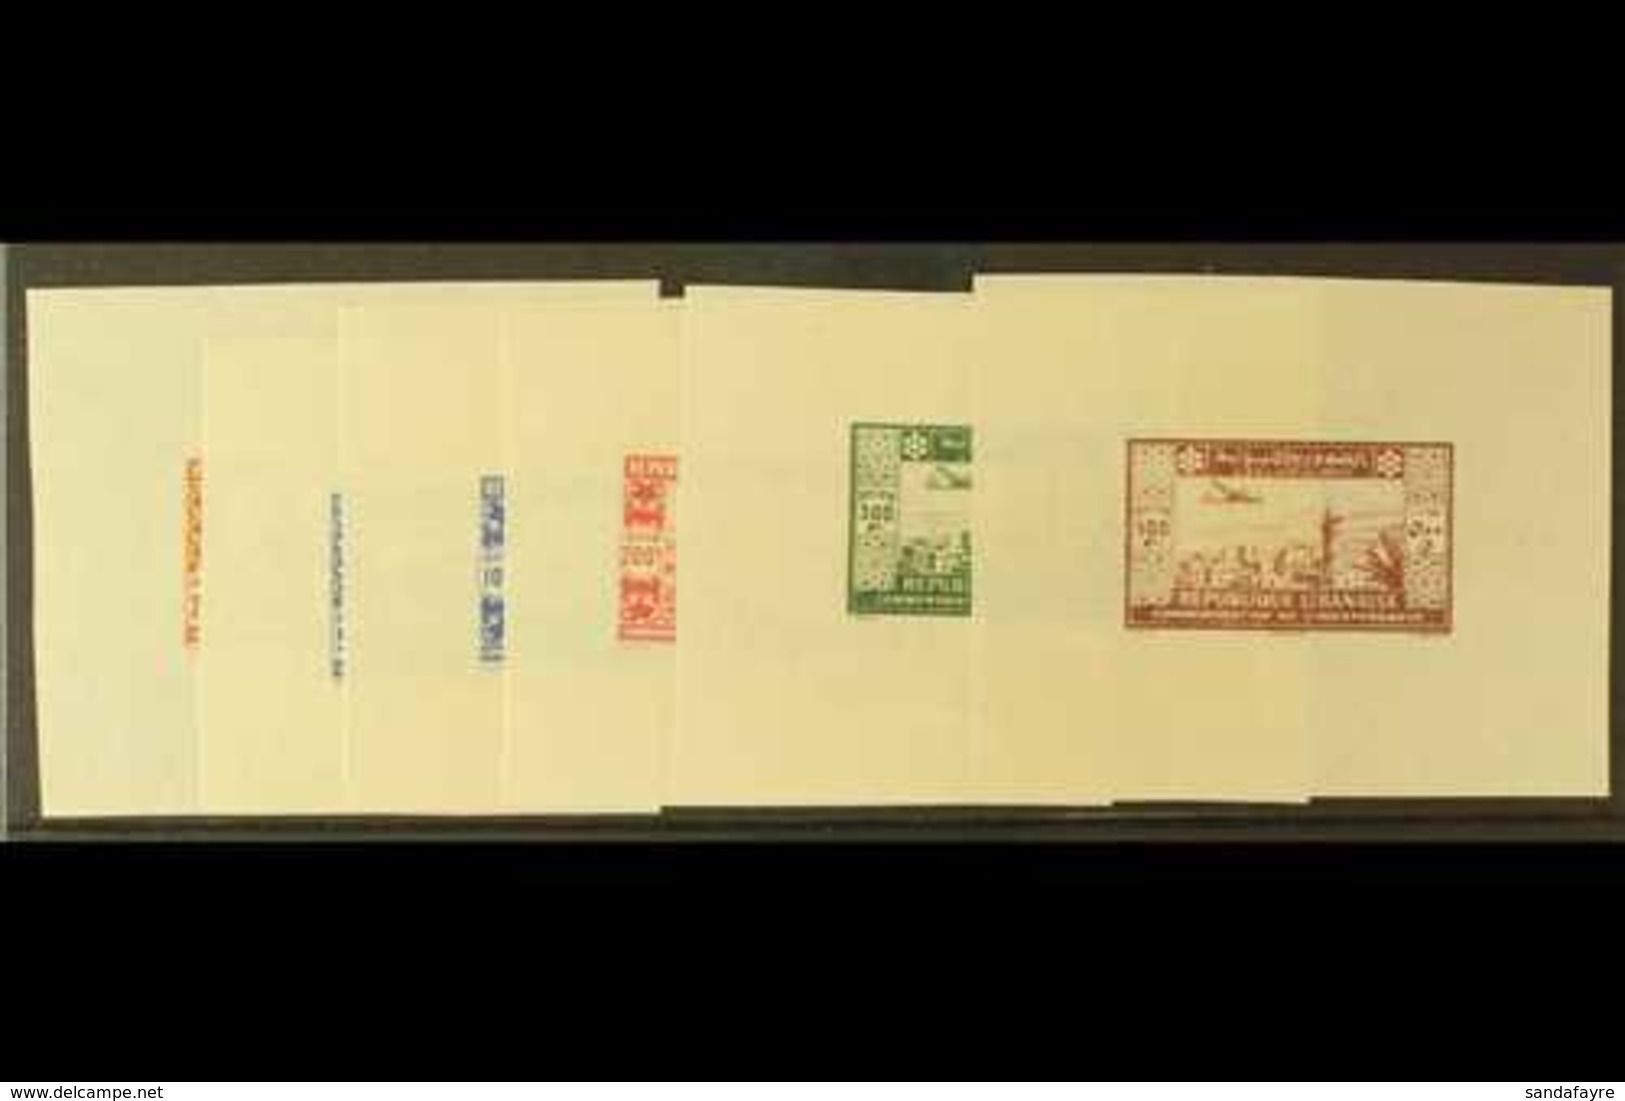 1944 2nd Anniversary Of Independence Air Set, As SG 269/74, Complete Set As Colour Trials On Gummed Paper. (6 Items) For - Líbano